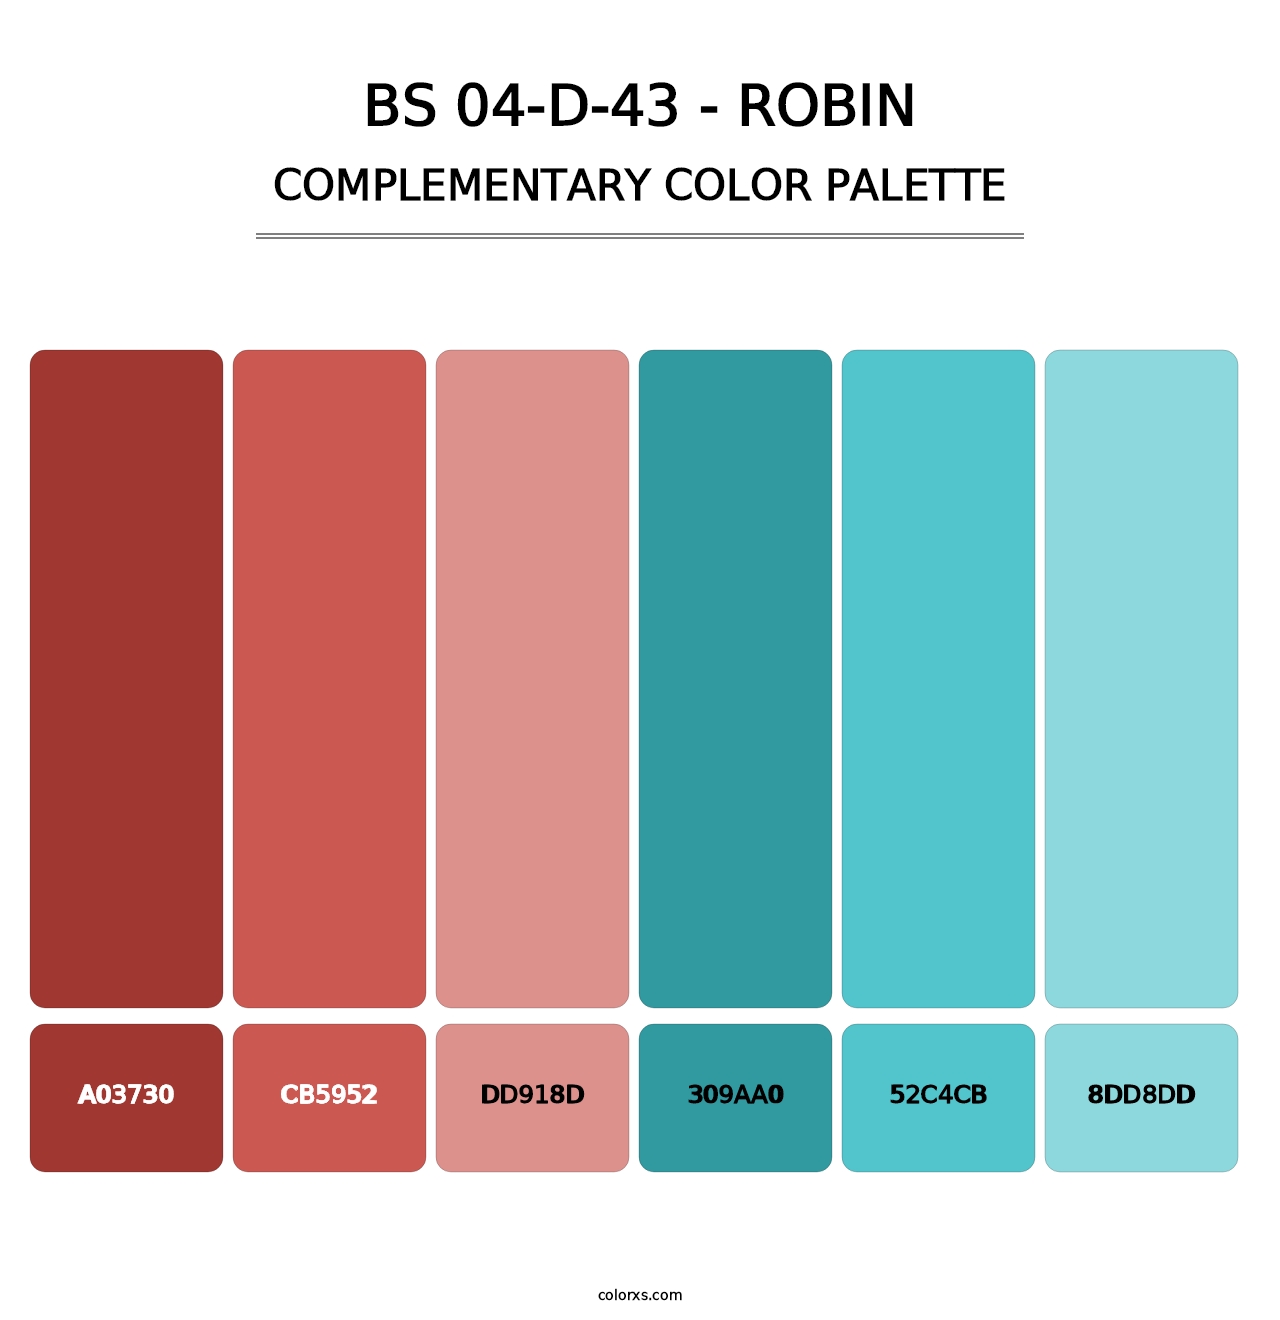 BS 04-D-43 - Robin - Complementary Color Palette